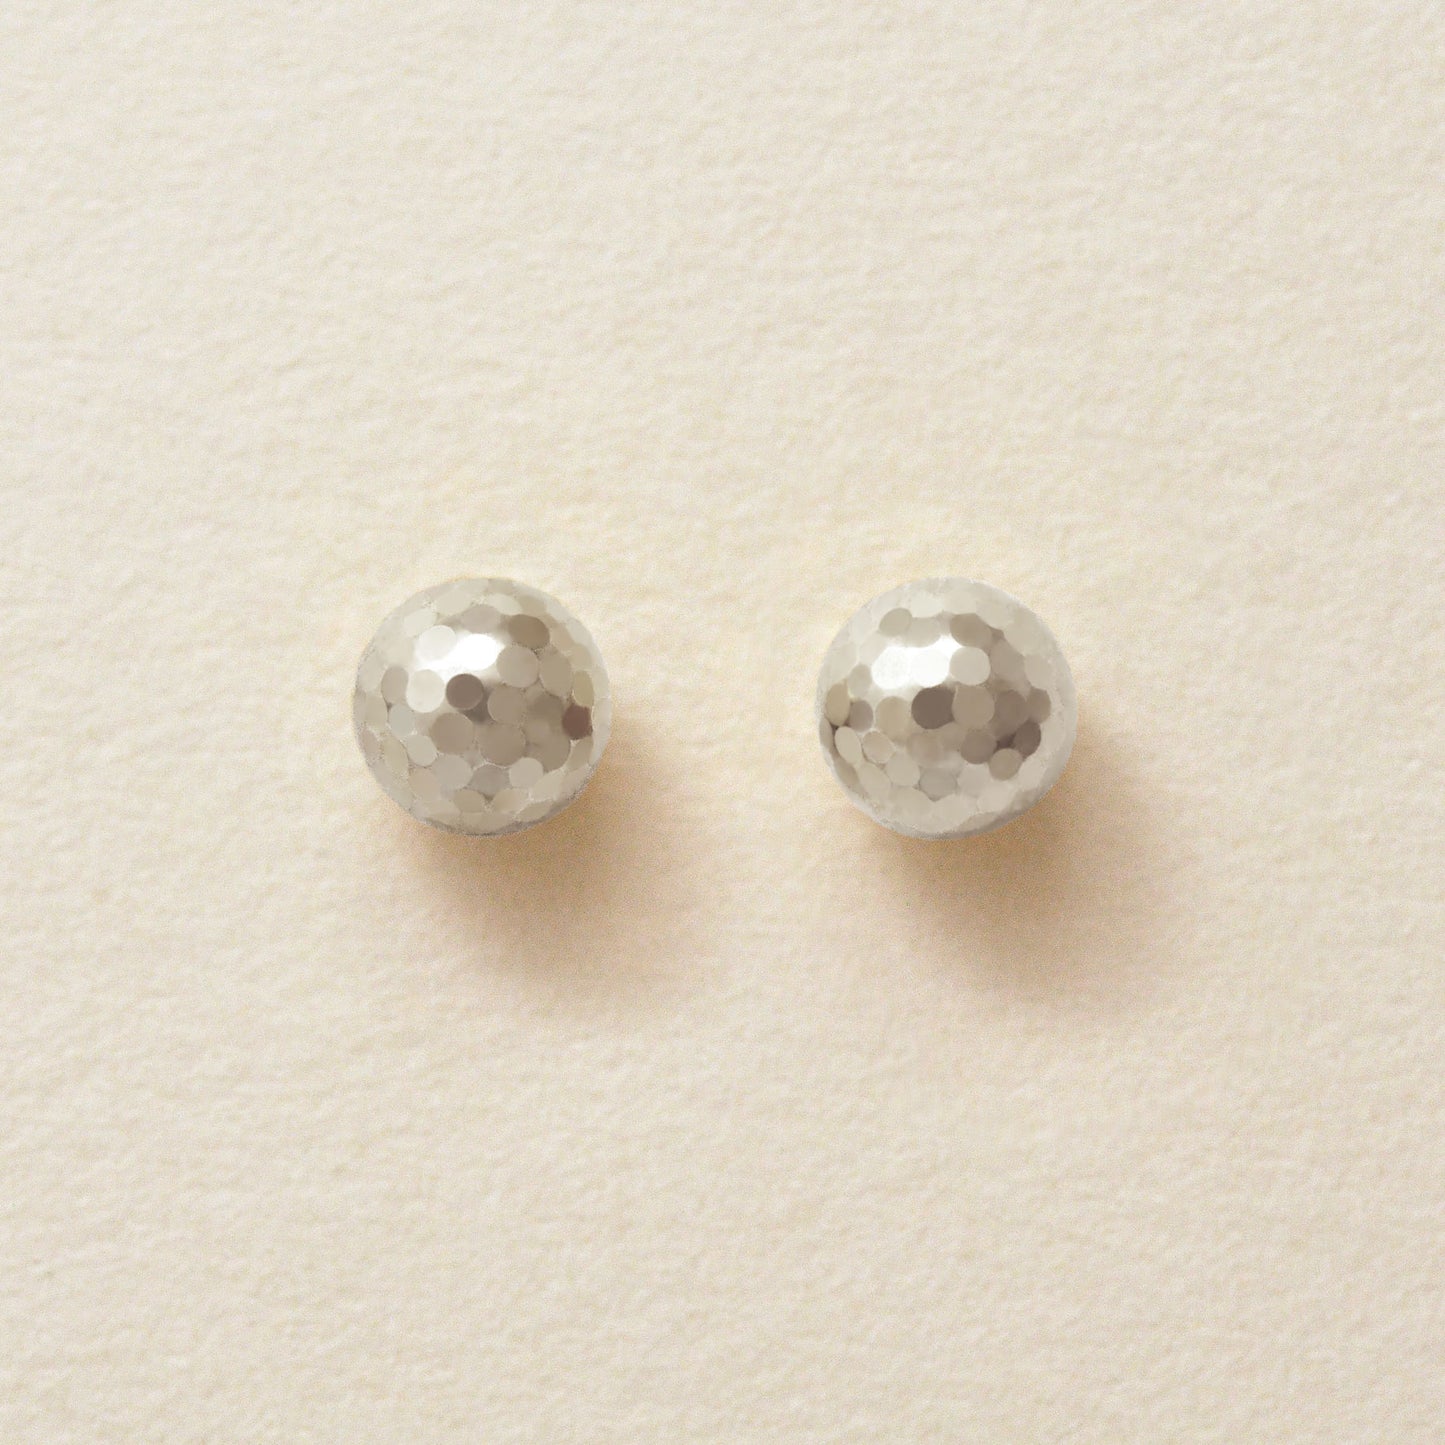 [Second Earrings] Platinum Mirror Ball Earrings (Φ5mm) - Product Image